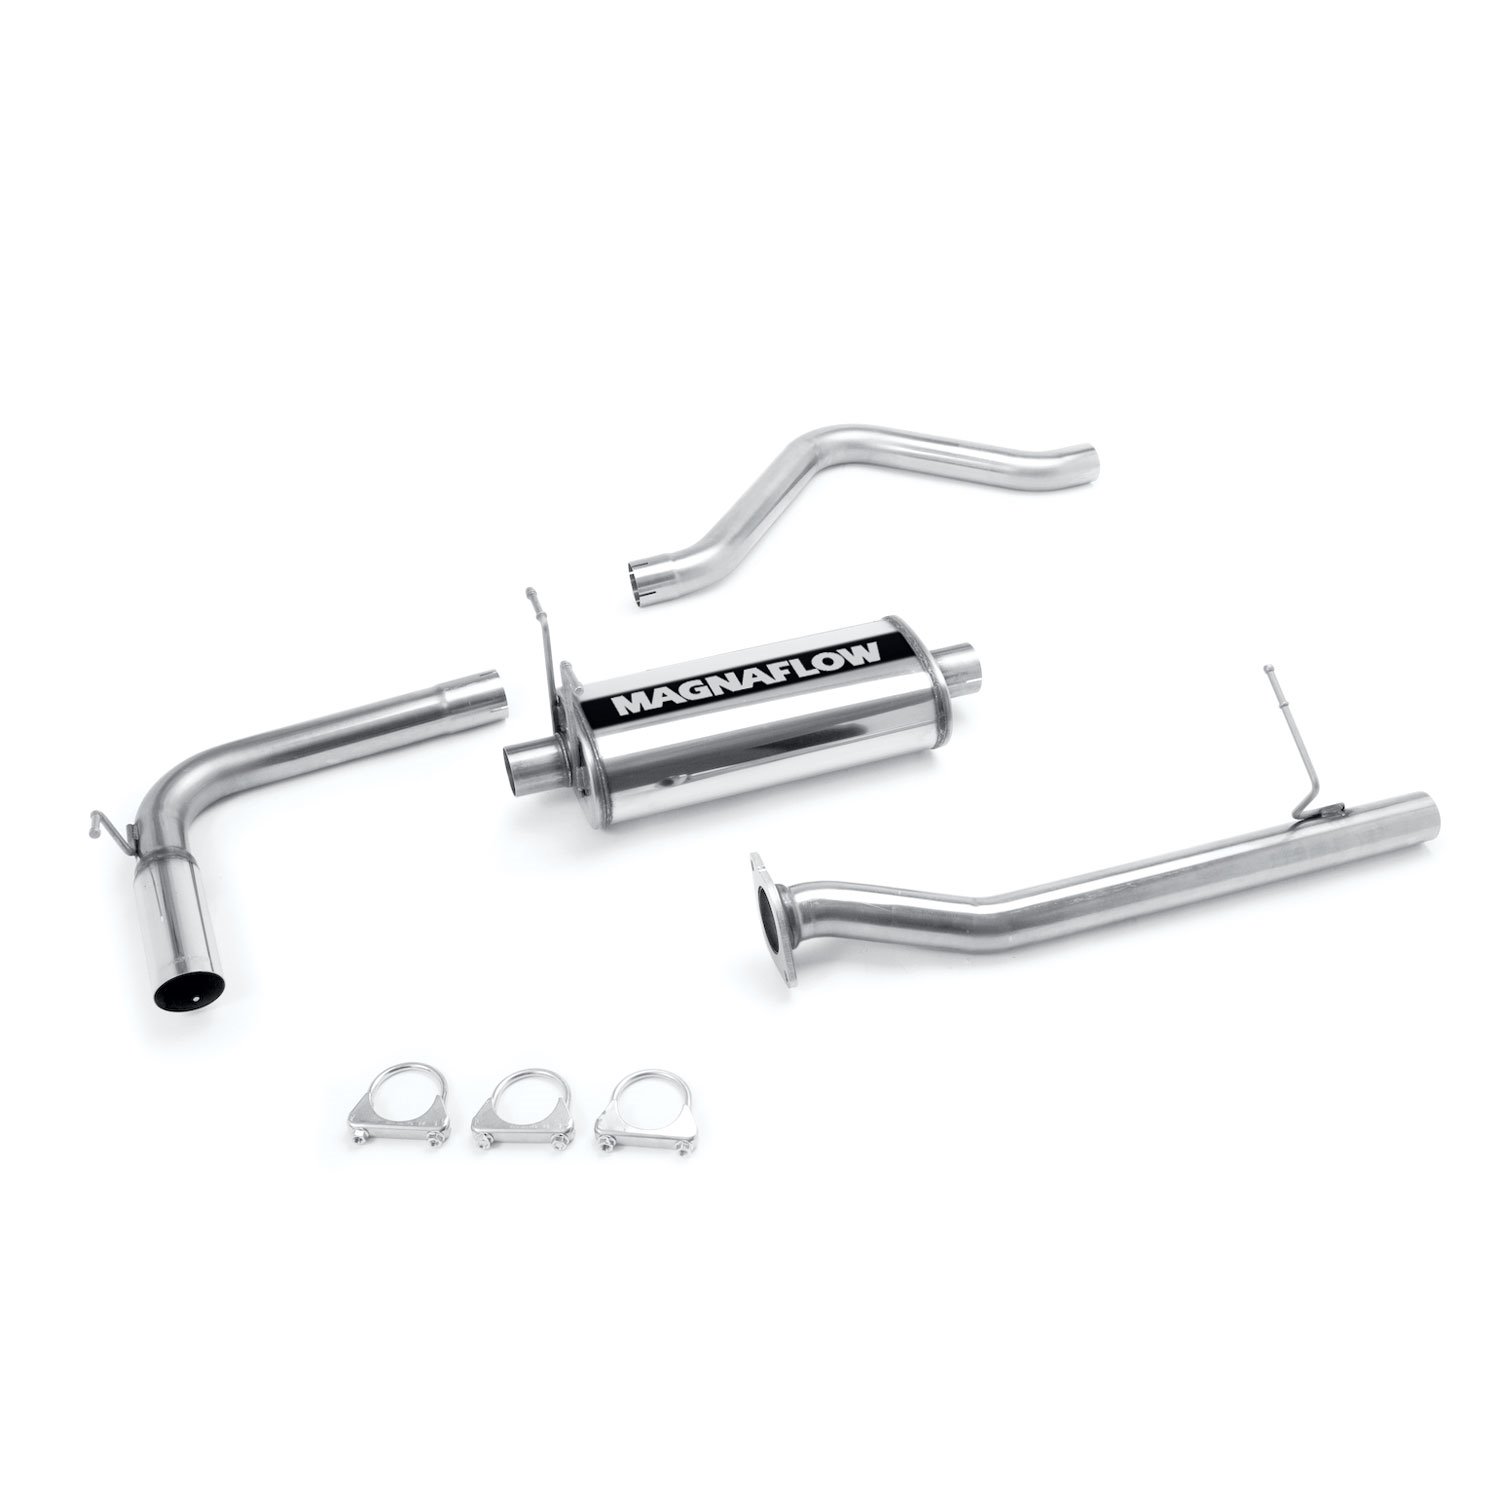 MF Series Cat-Back Exhaust System 2000-03 S10/Sonoma 4.3L (Ext Cab, 73.1" Bed)